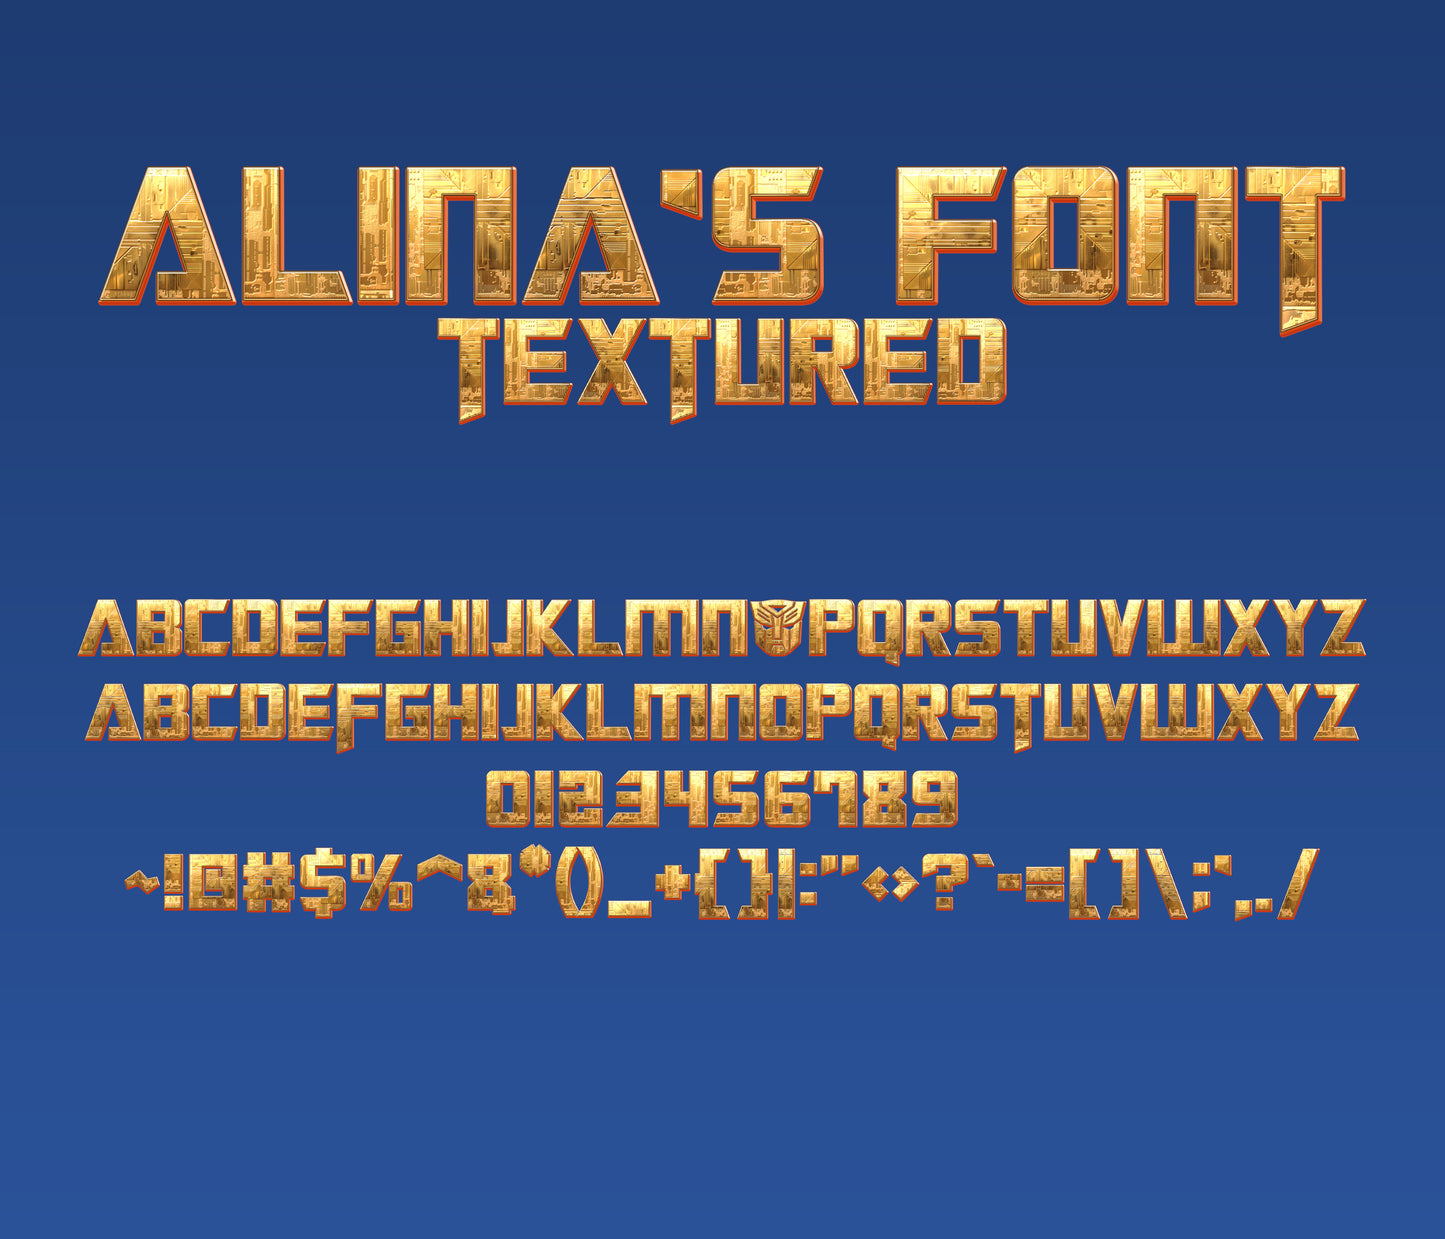 Transformers One Textured Font